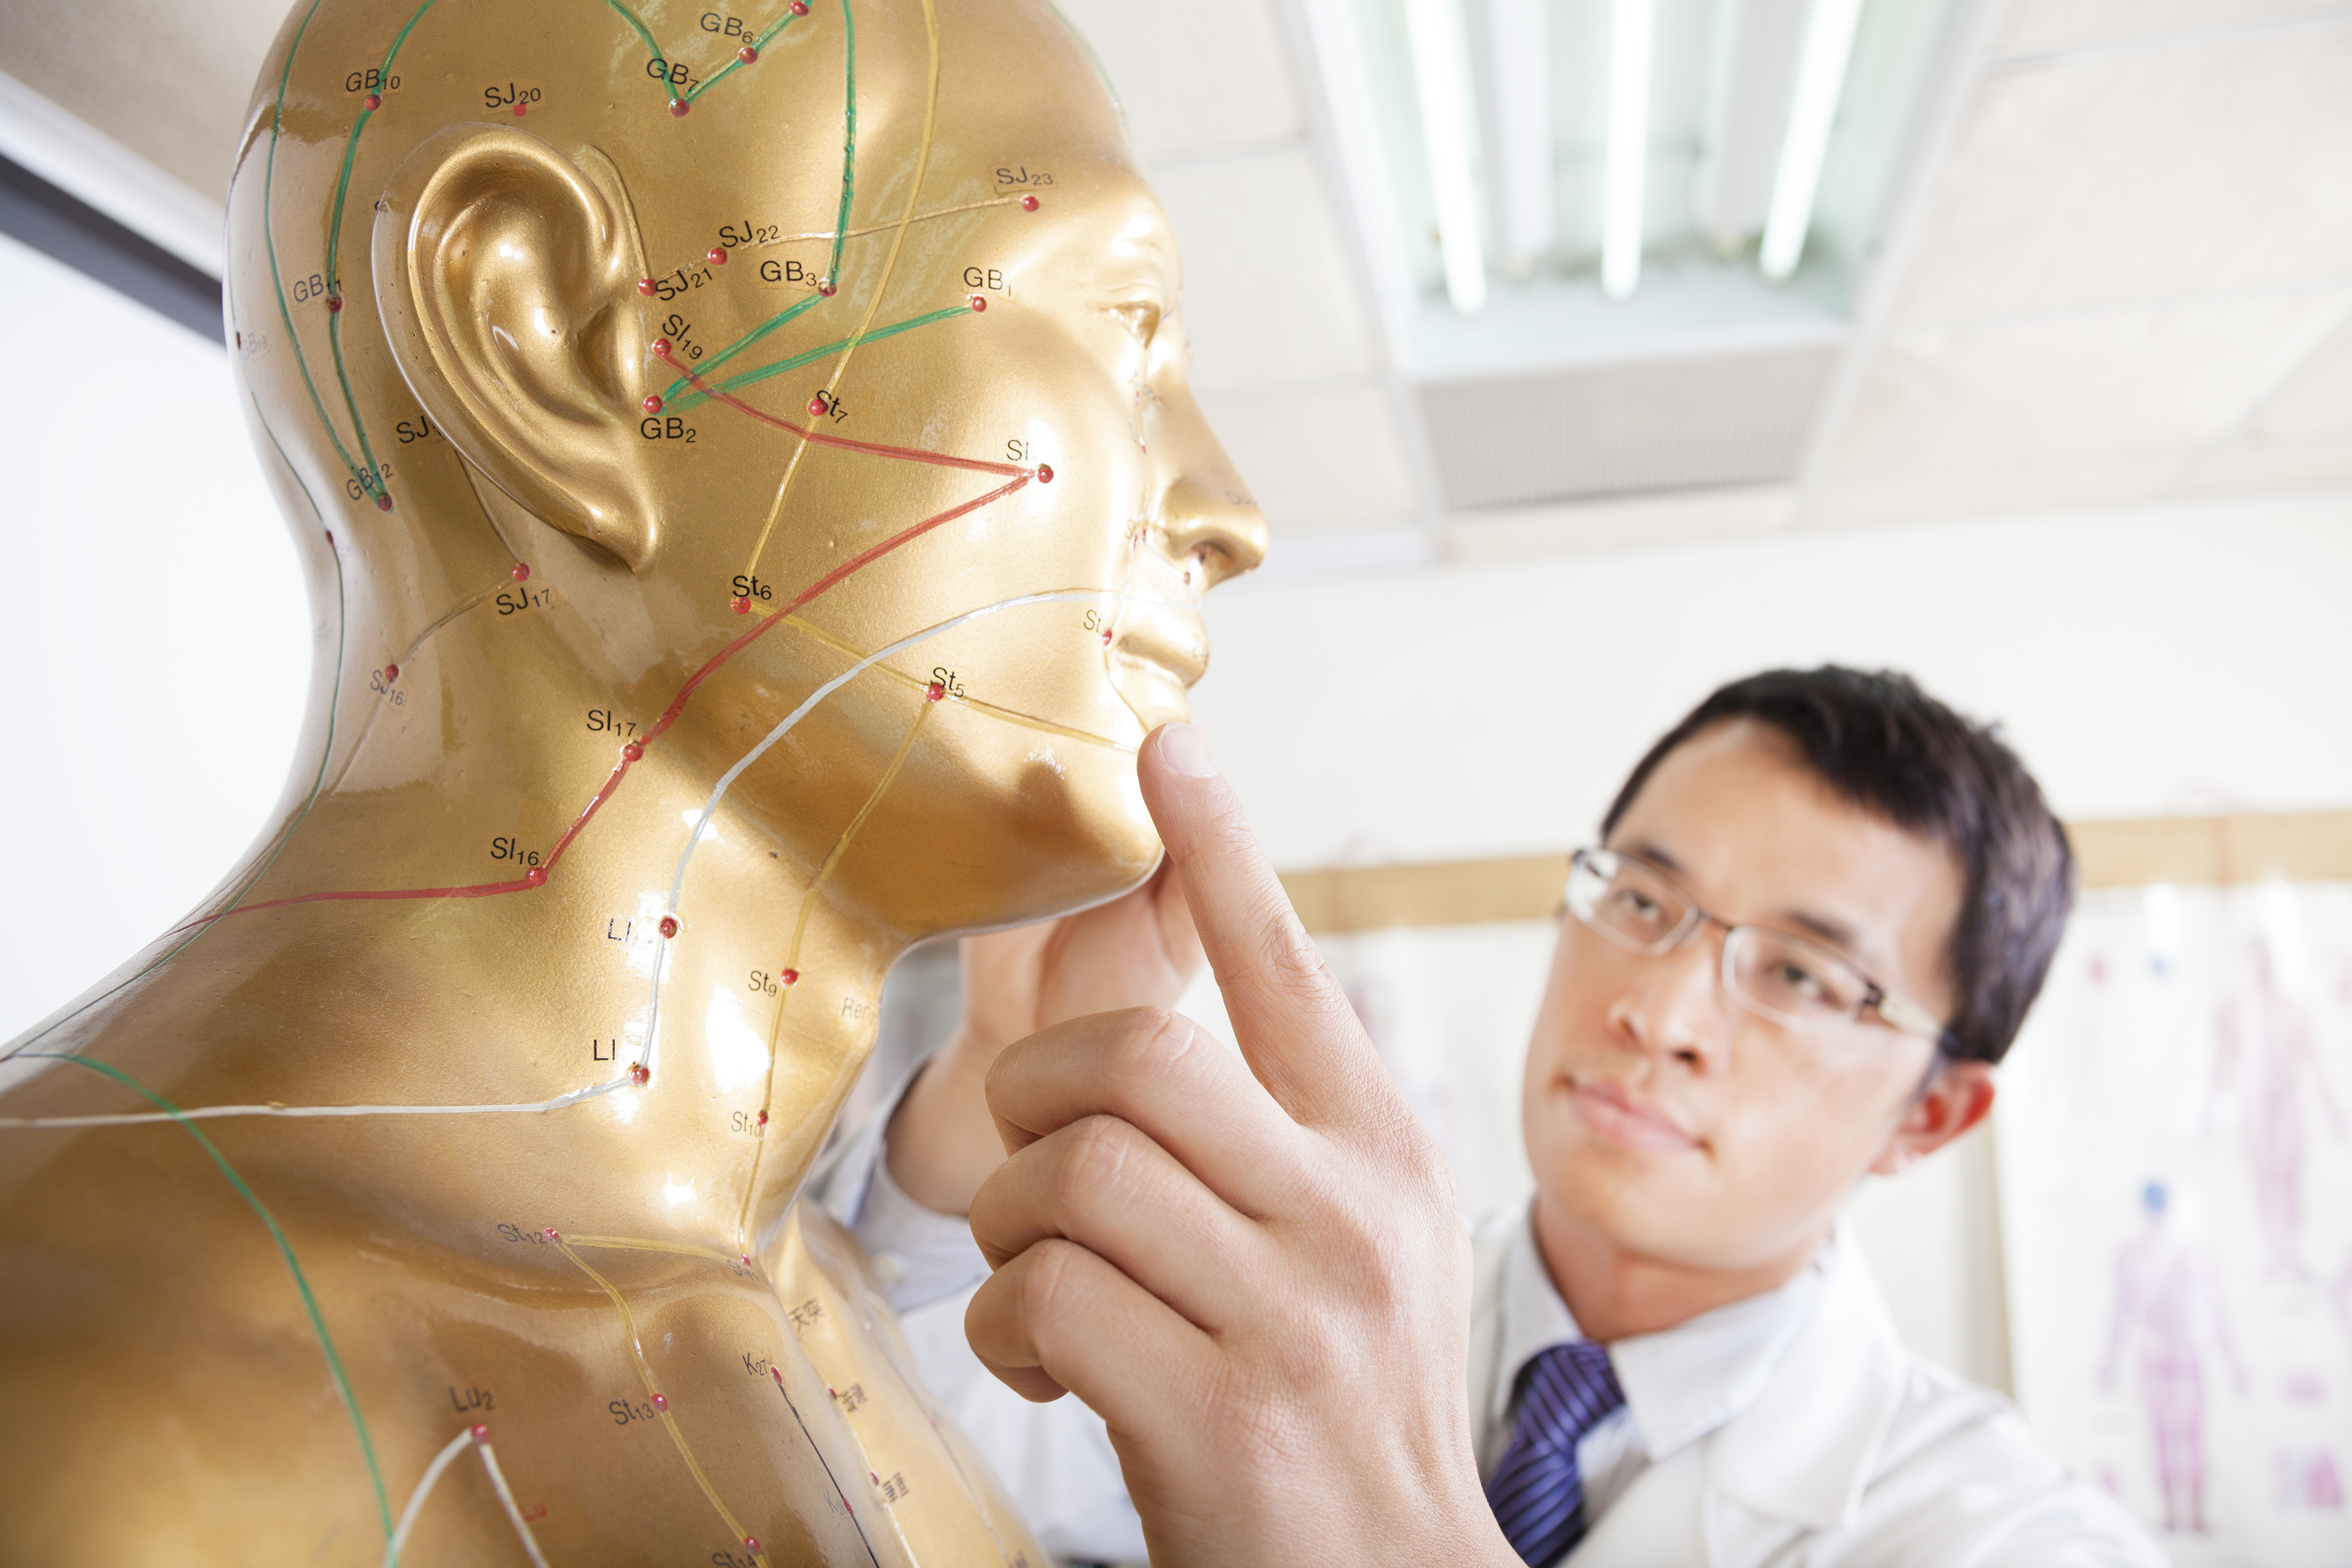 A doctor examining the acupuncture points